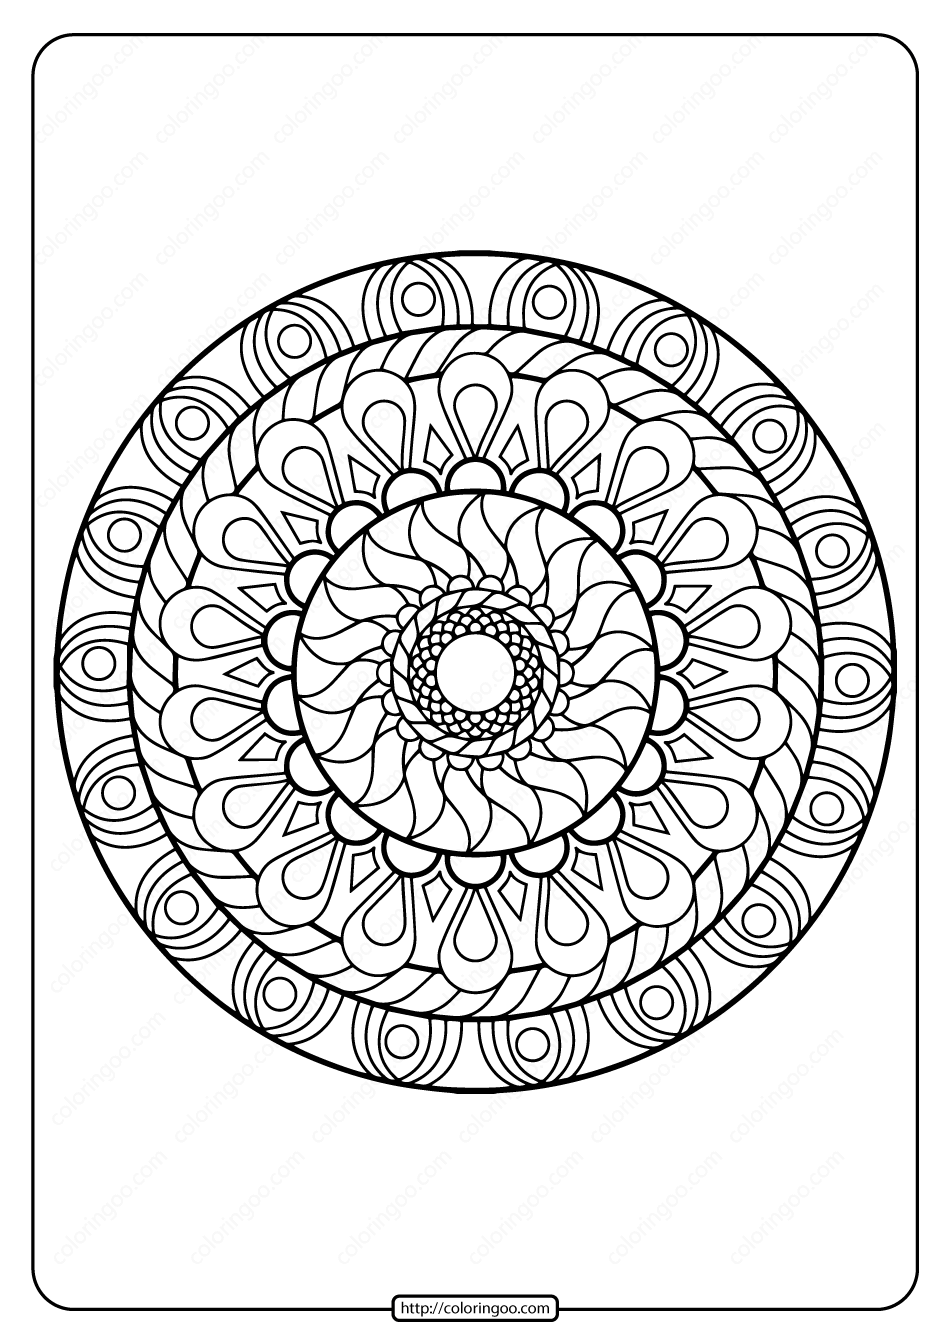 adult coloring pages book 18